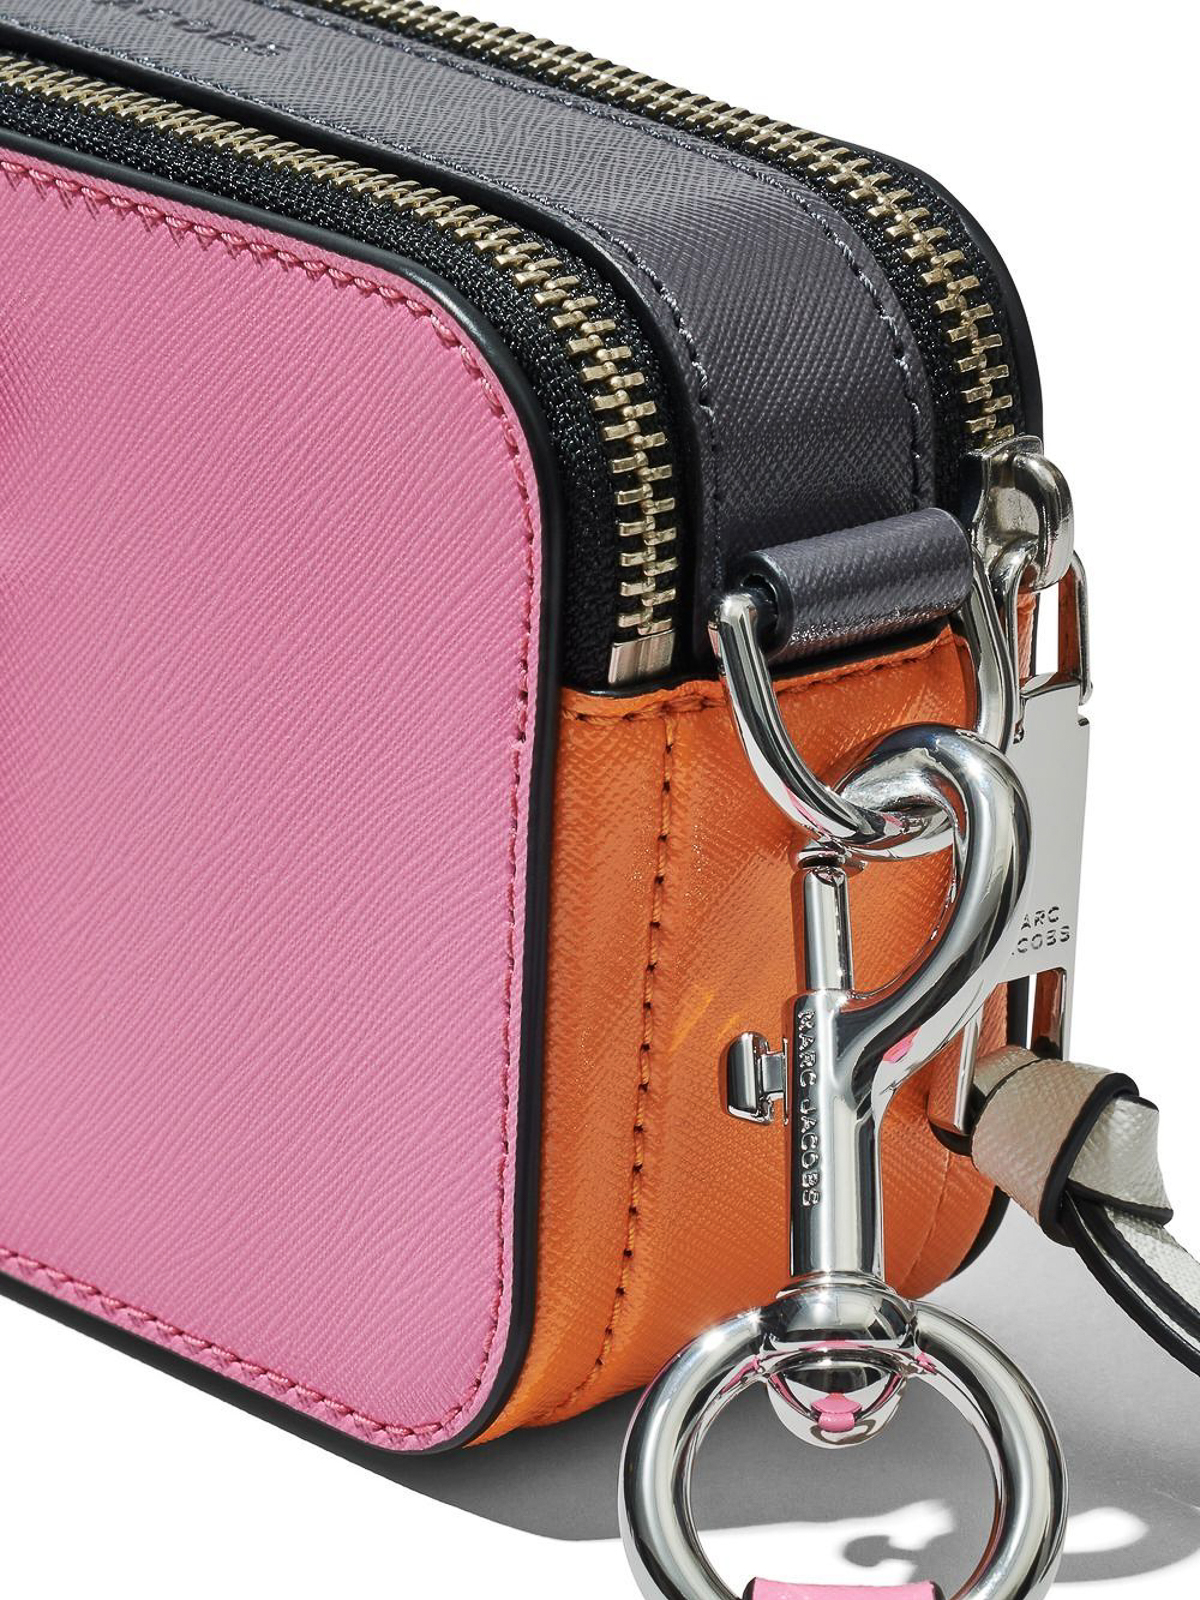 Marc Jacobs - Snapshot - Pink black and orange leather bag with